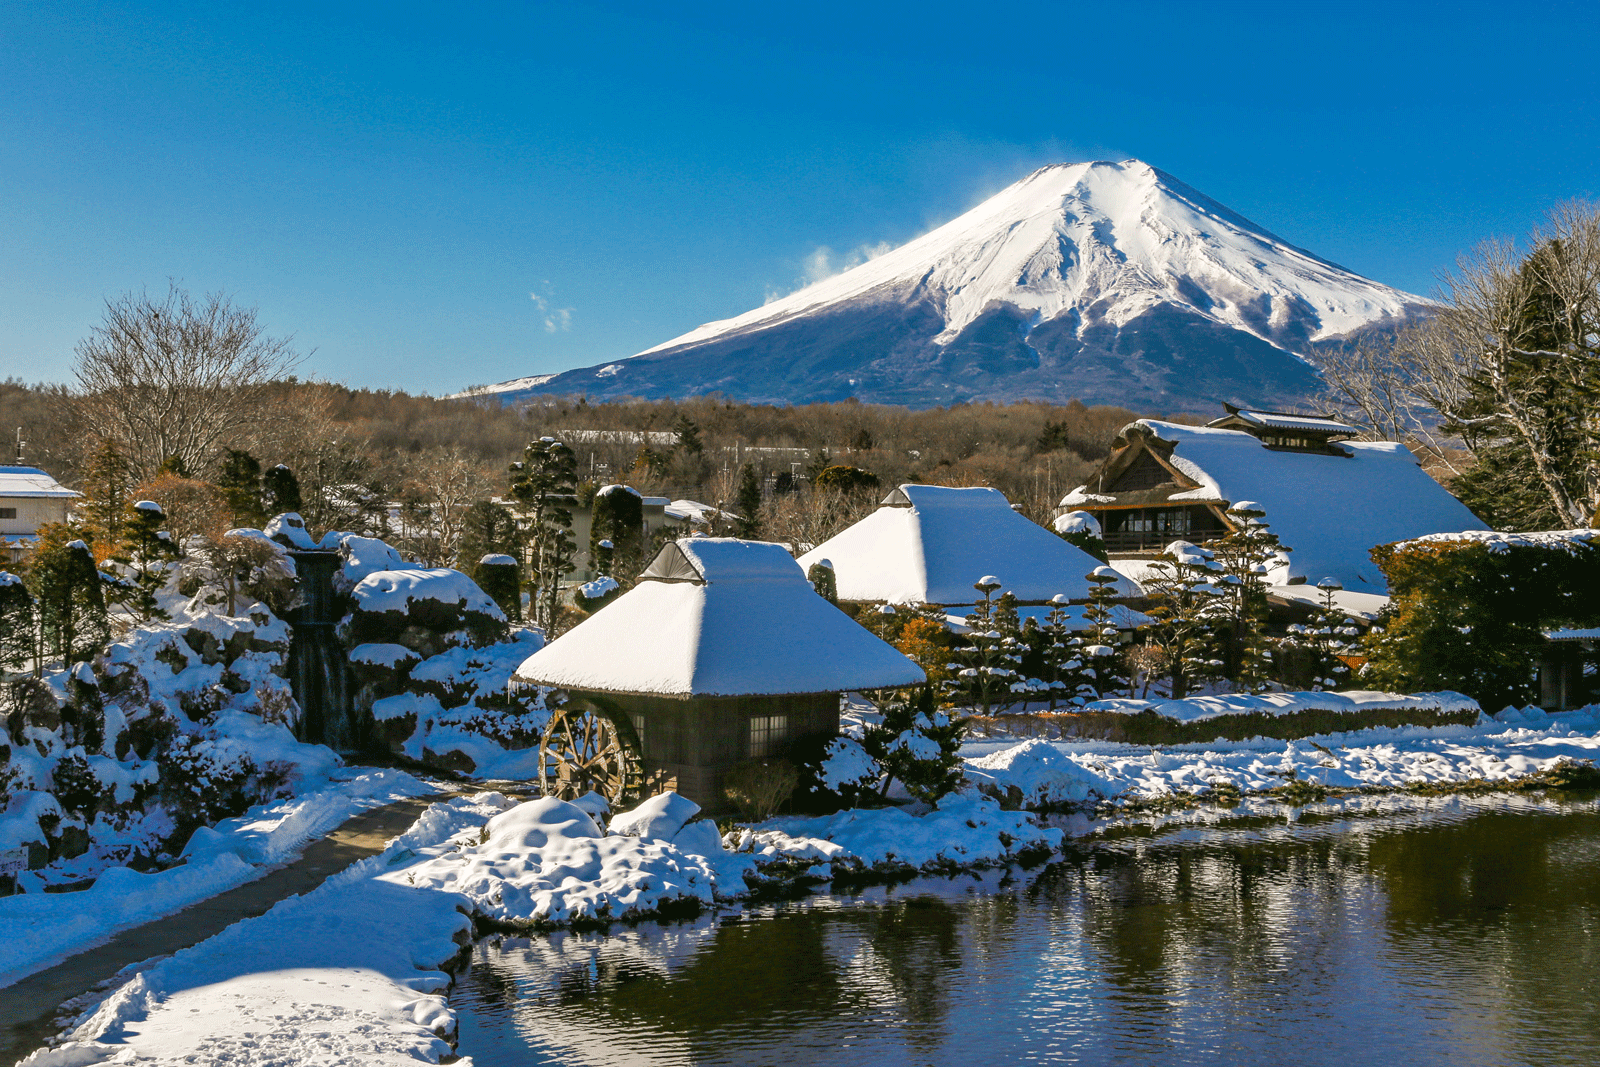 Oshino Hakkai, one of the delightful towns of the so-called Fuji Five Lakes district